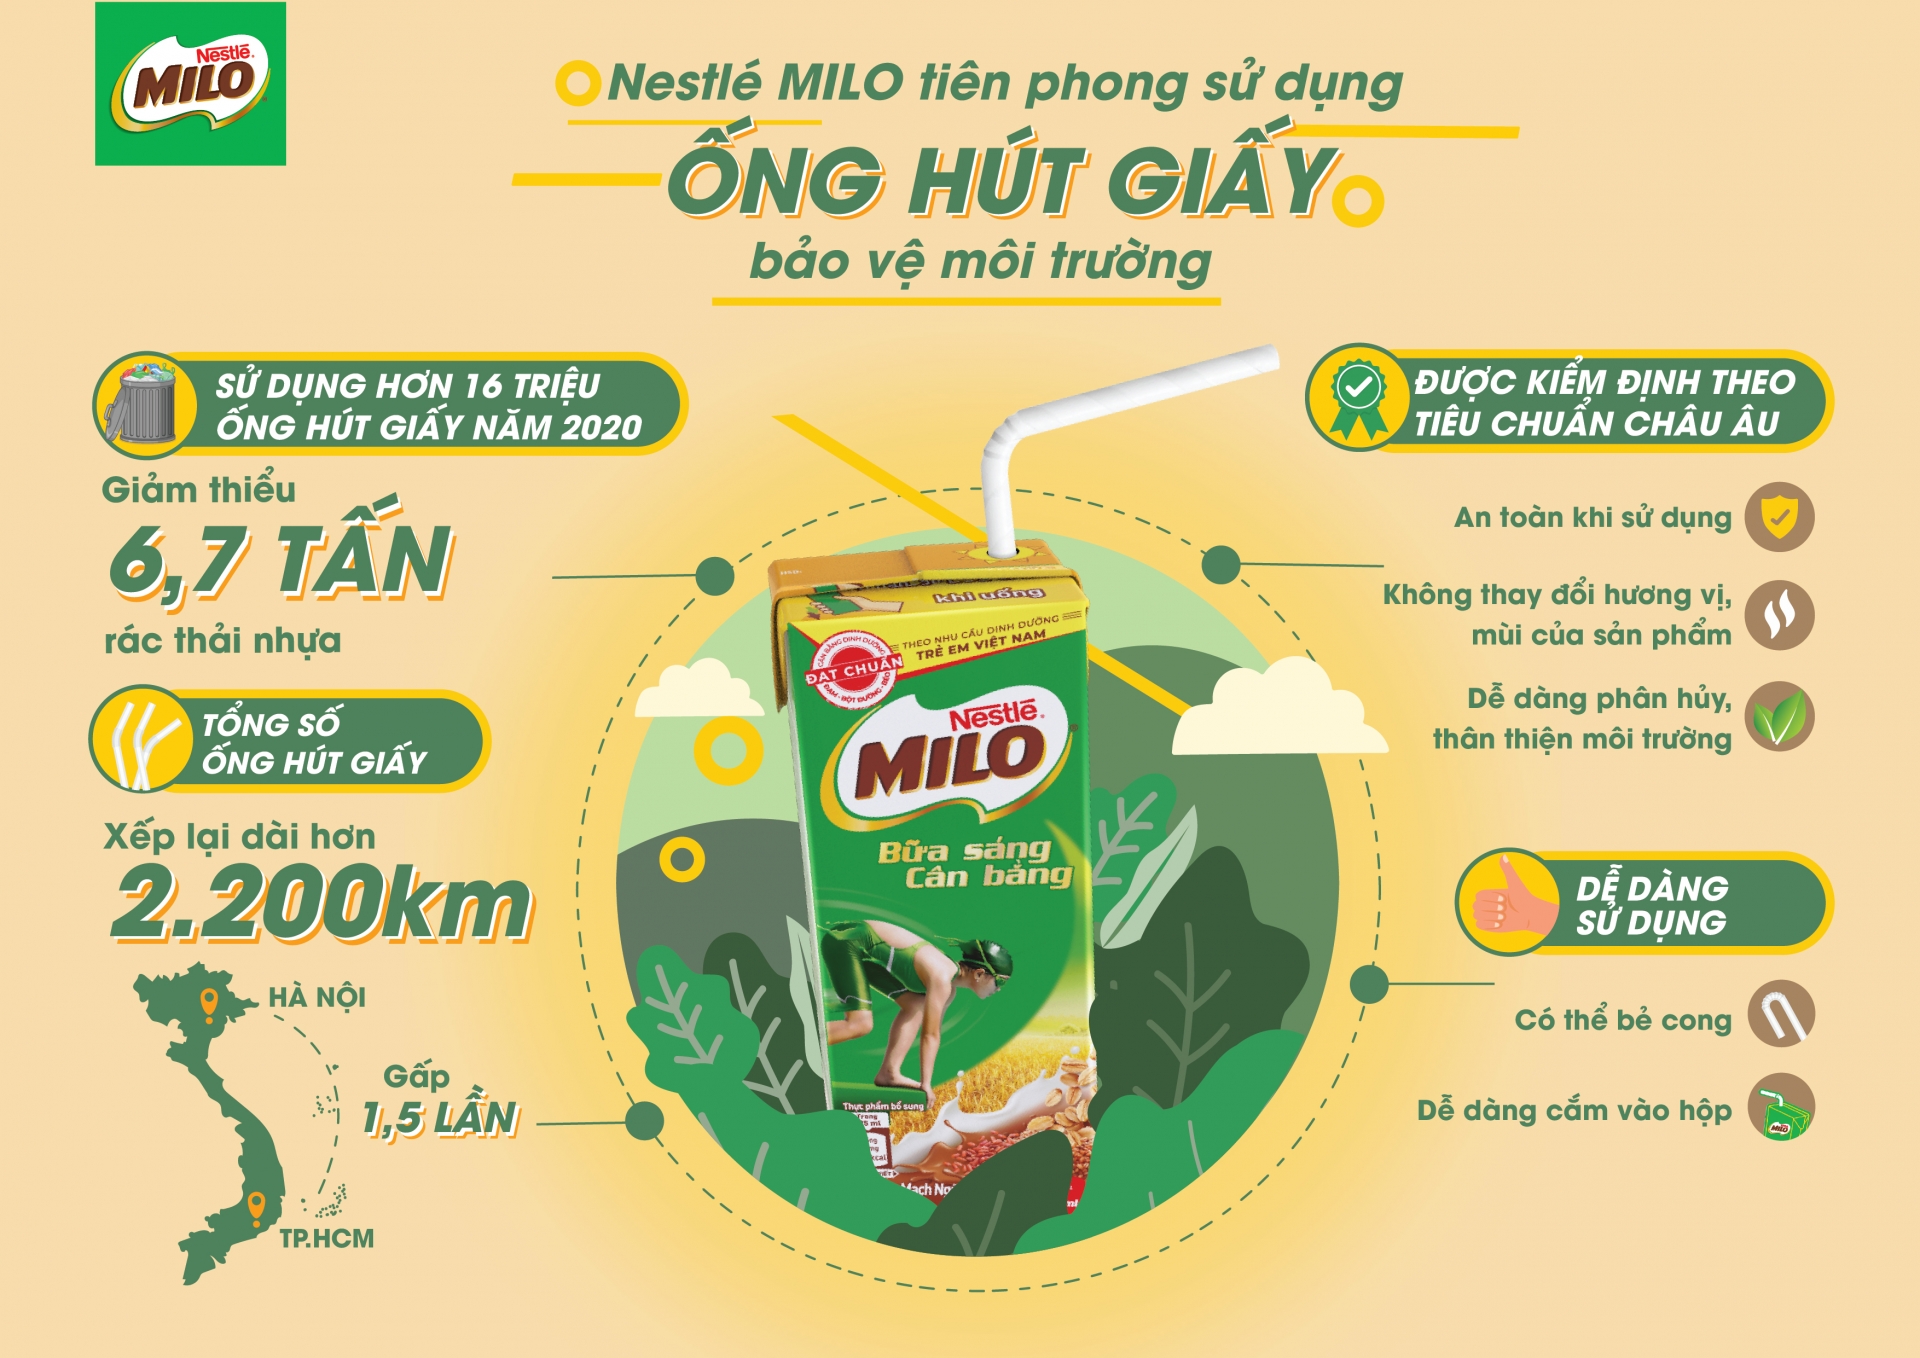 nestle milo launches paper straws for milo breakfast drink to promote green consumption trends